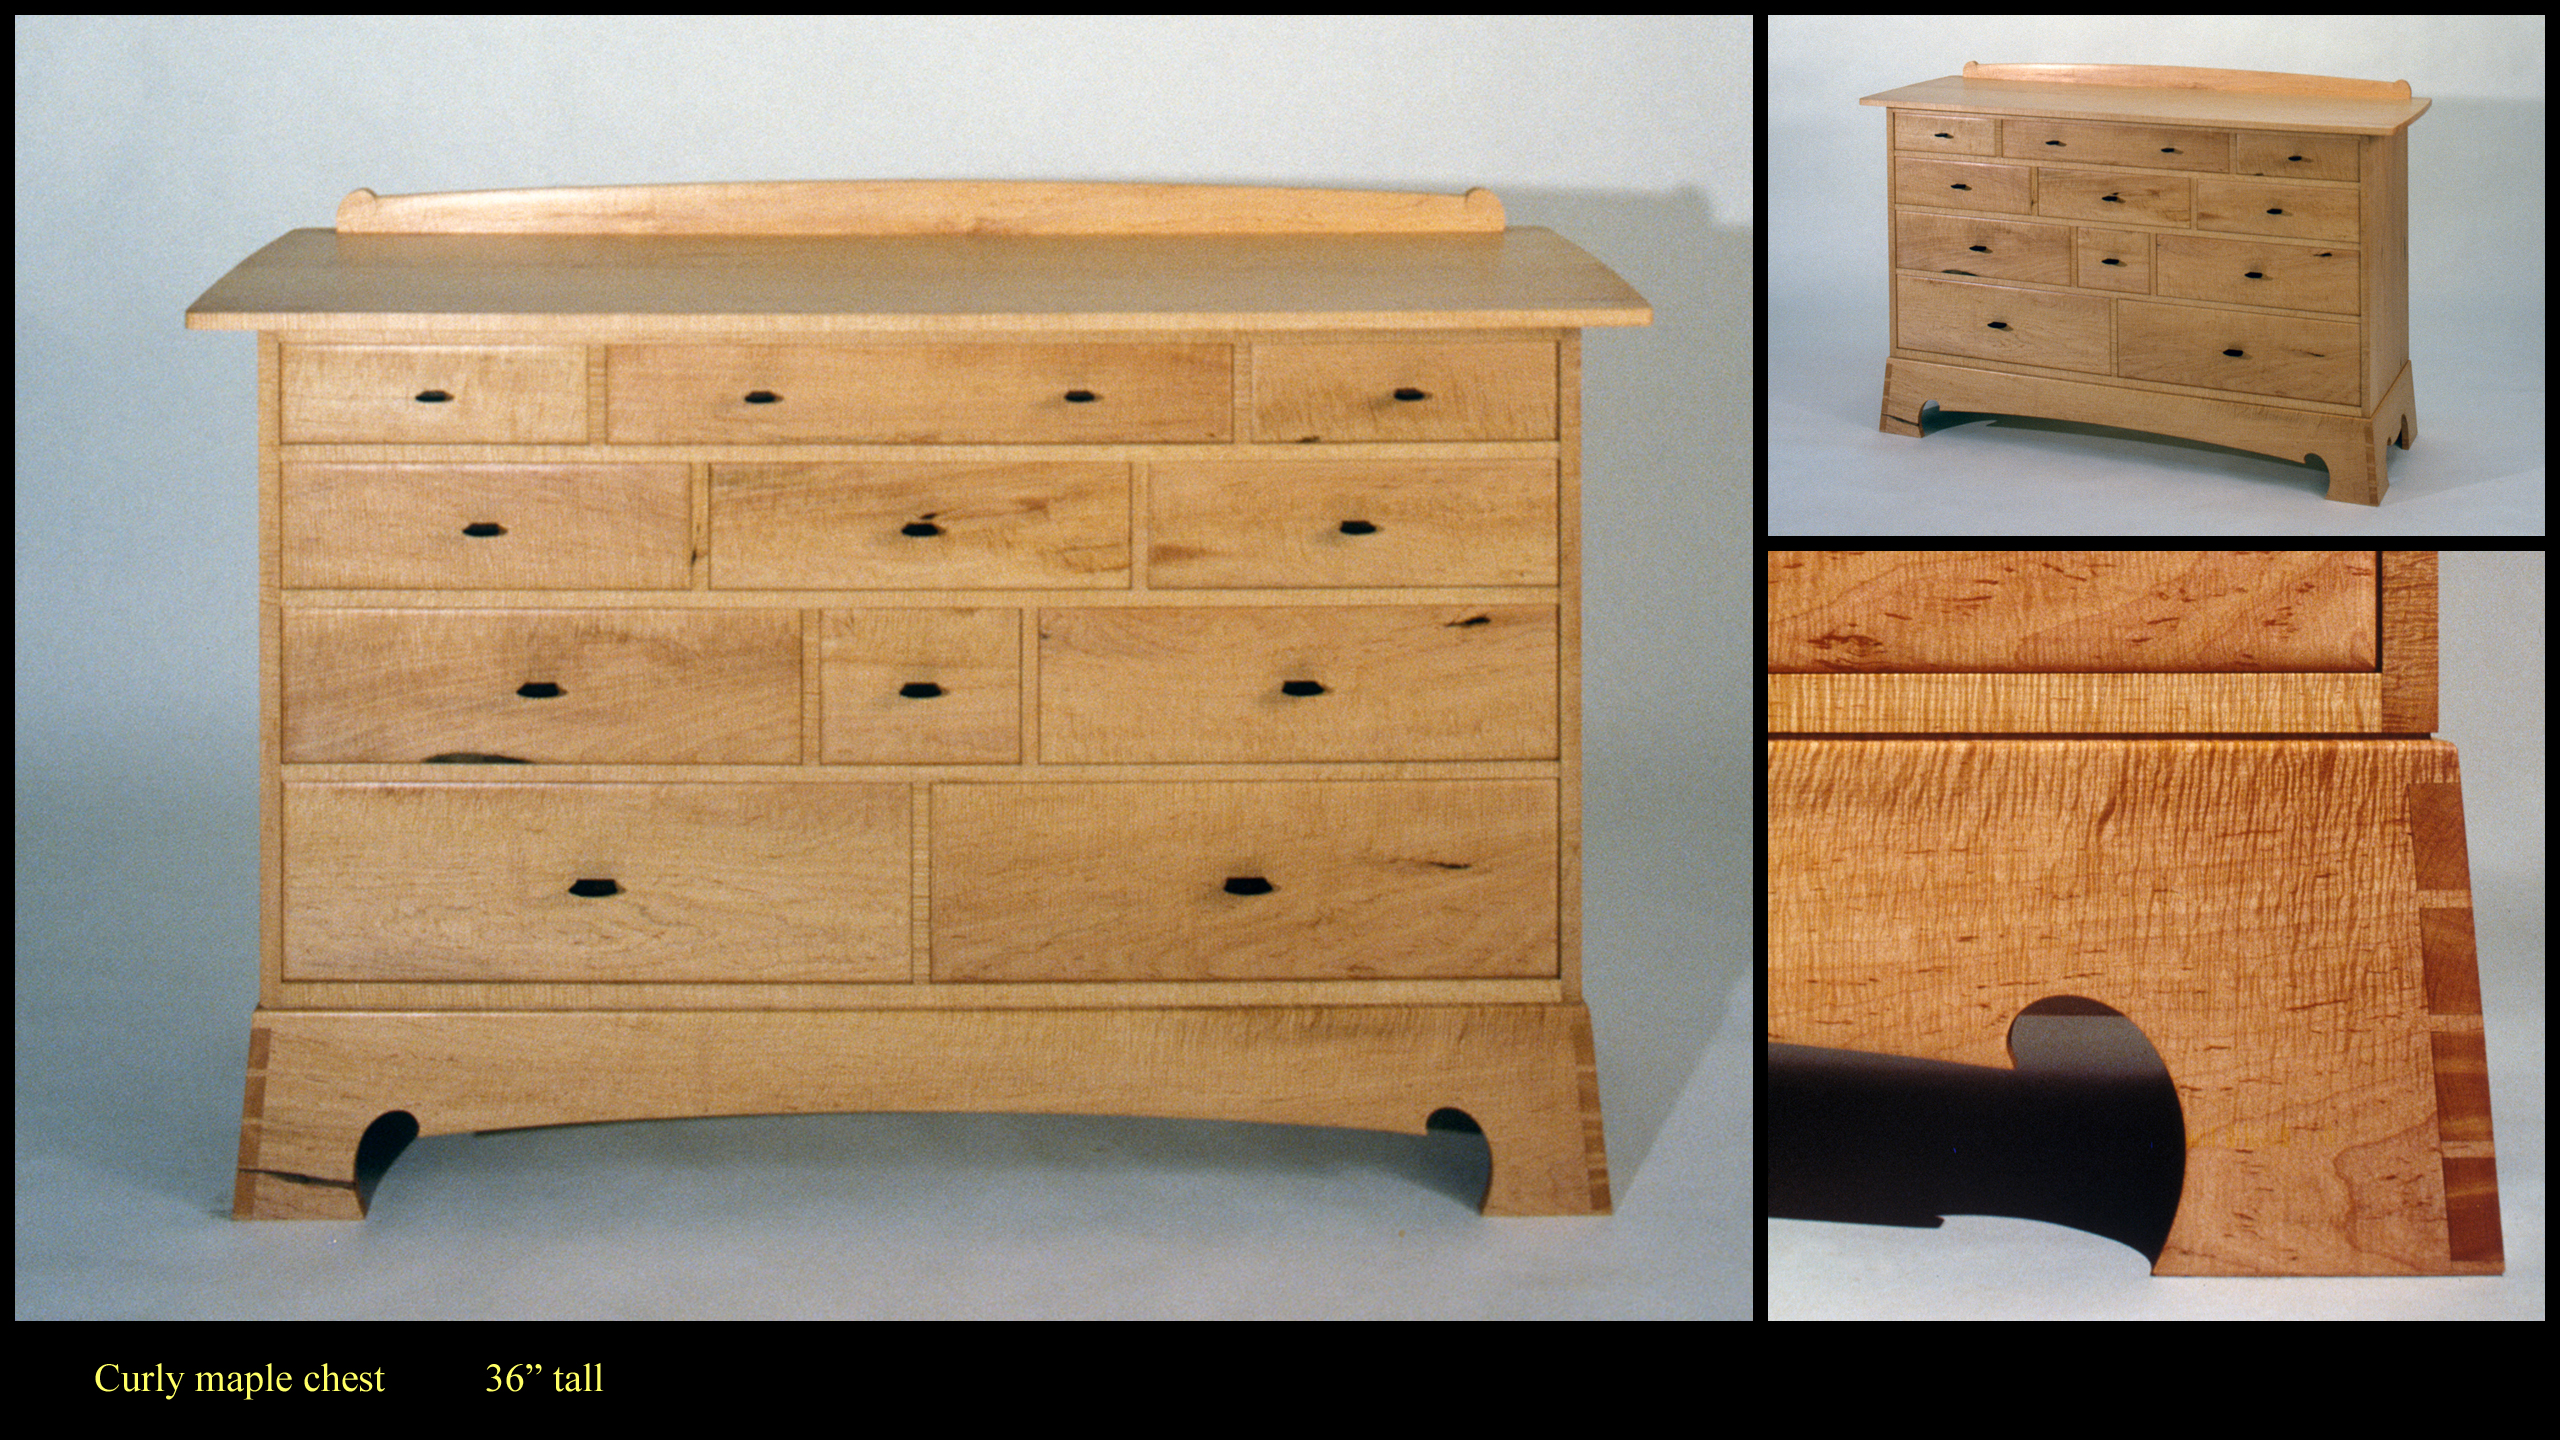 curly-maple-chest